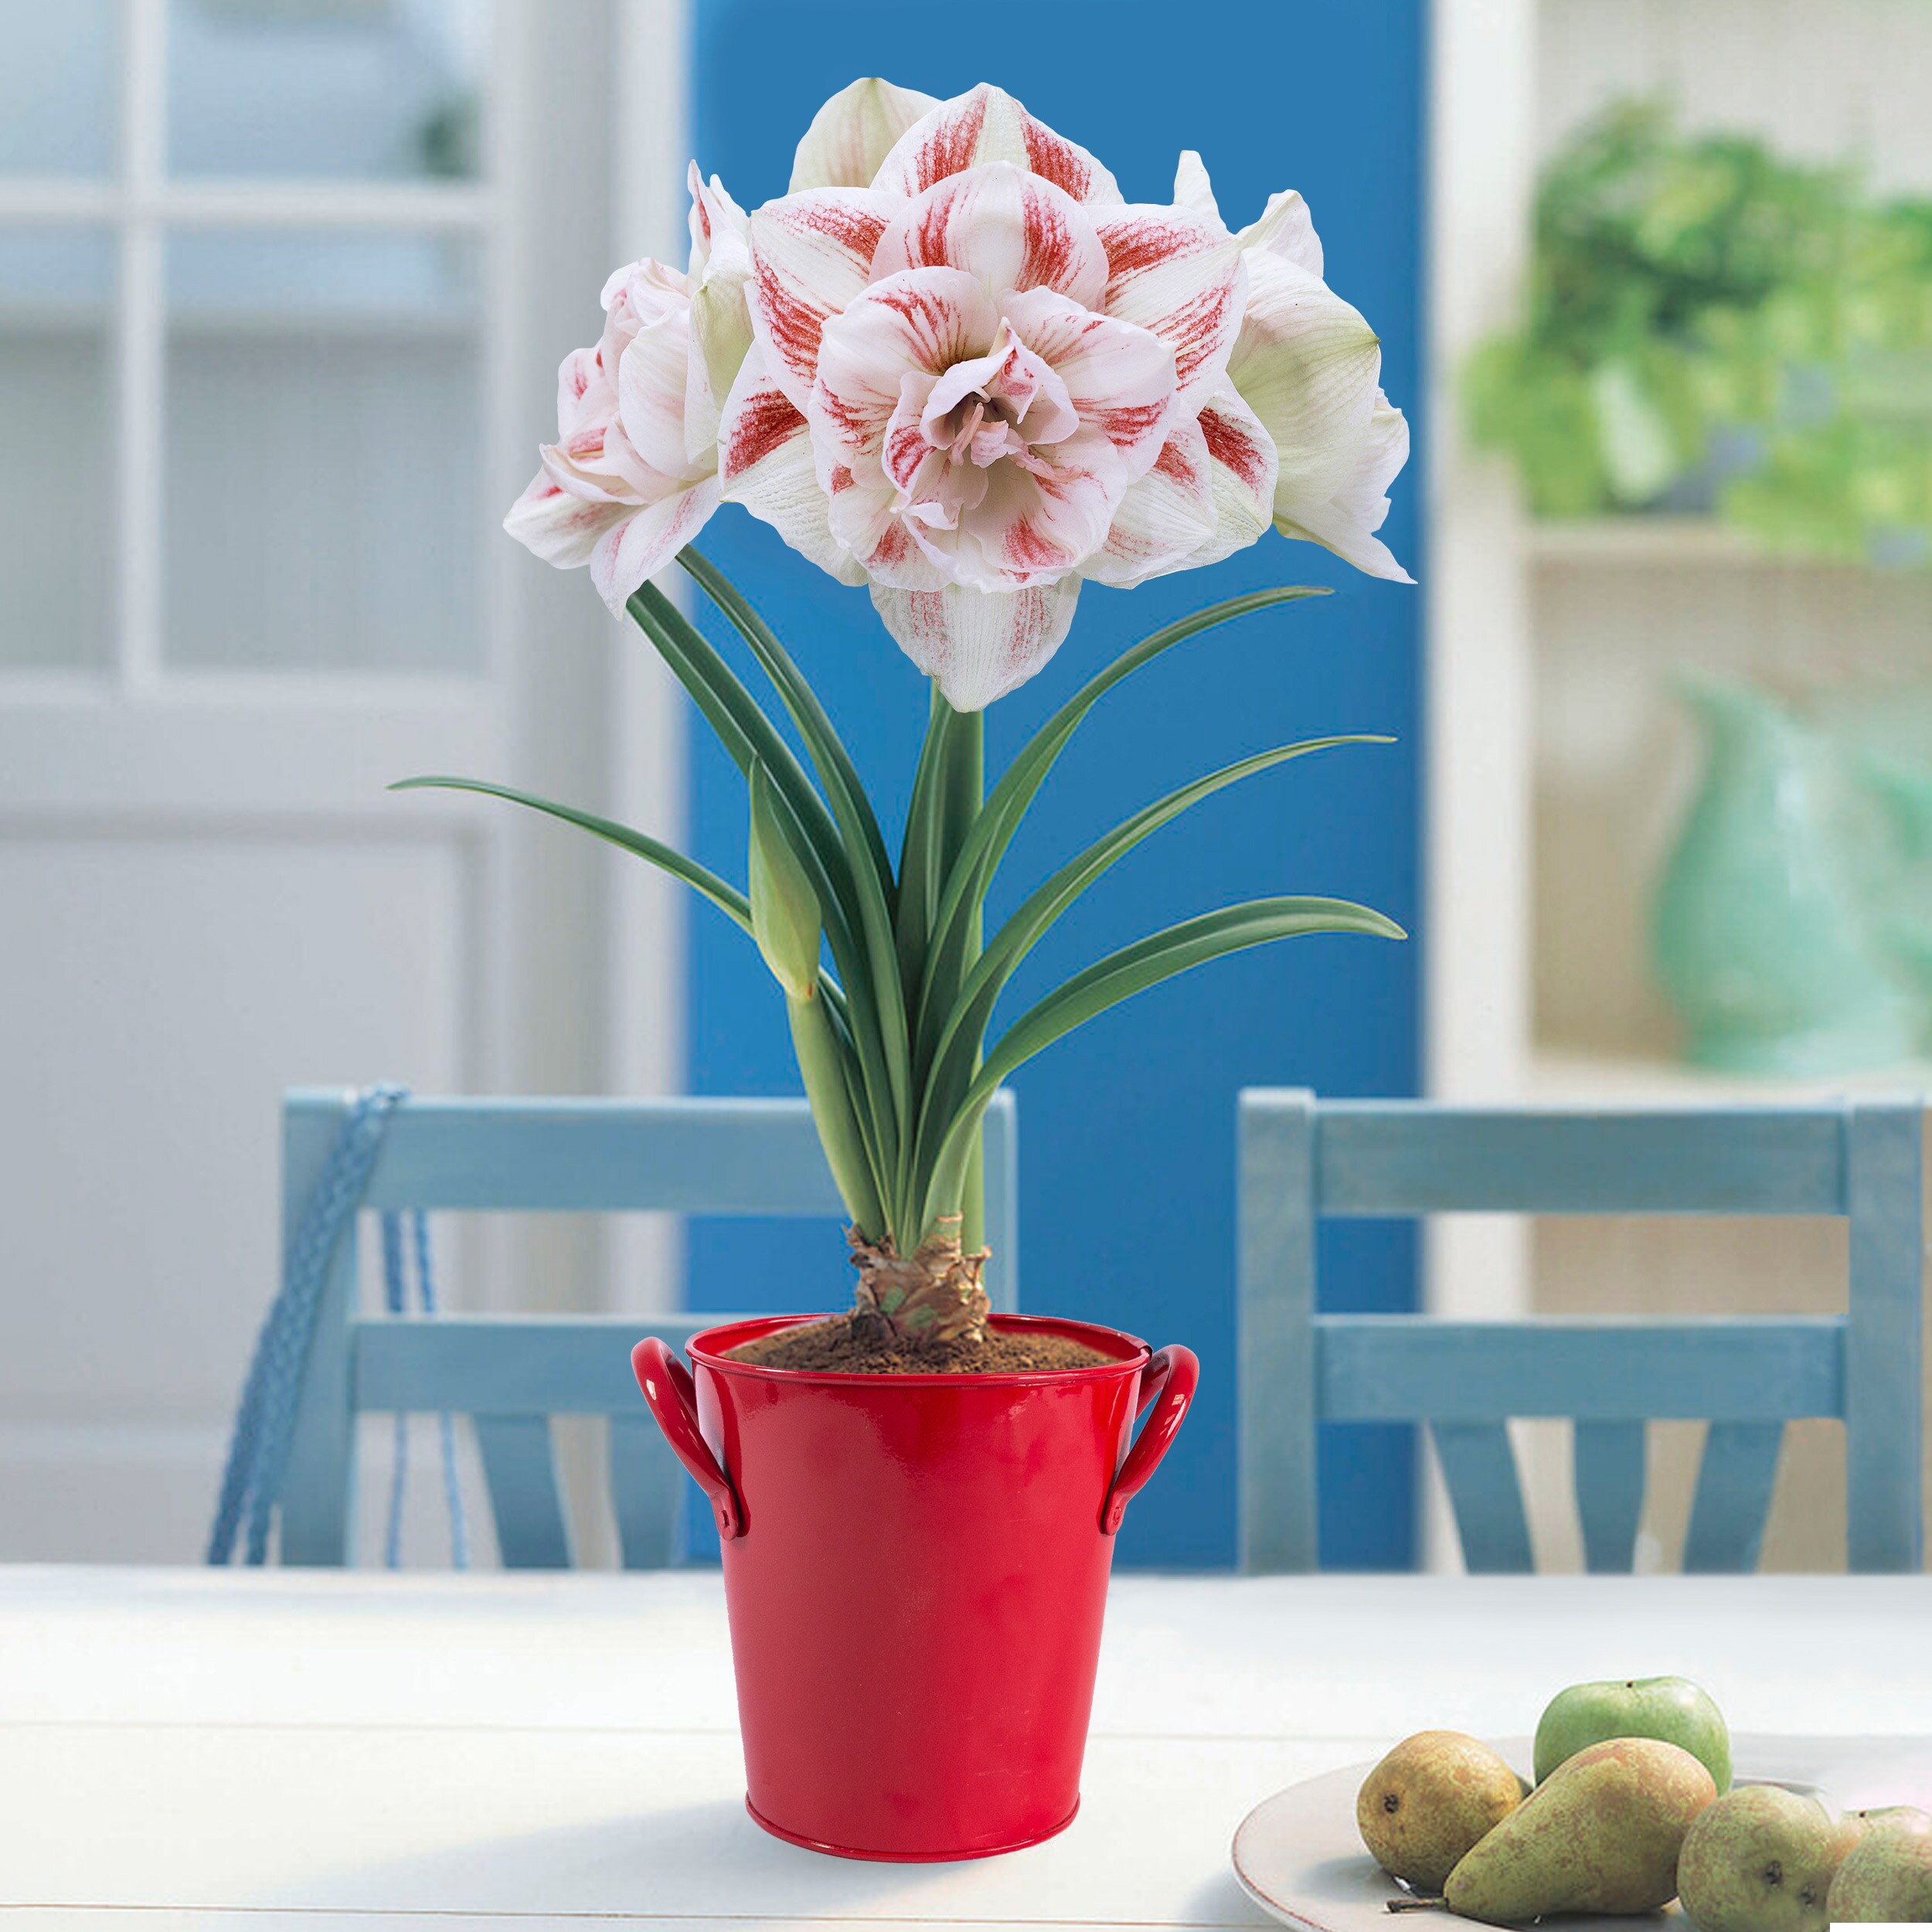 Garden State Bulb White Nymph Double Amaryllis Gift Kit Bulbs in the ...